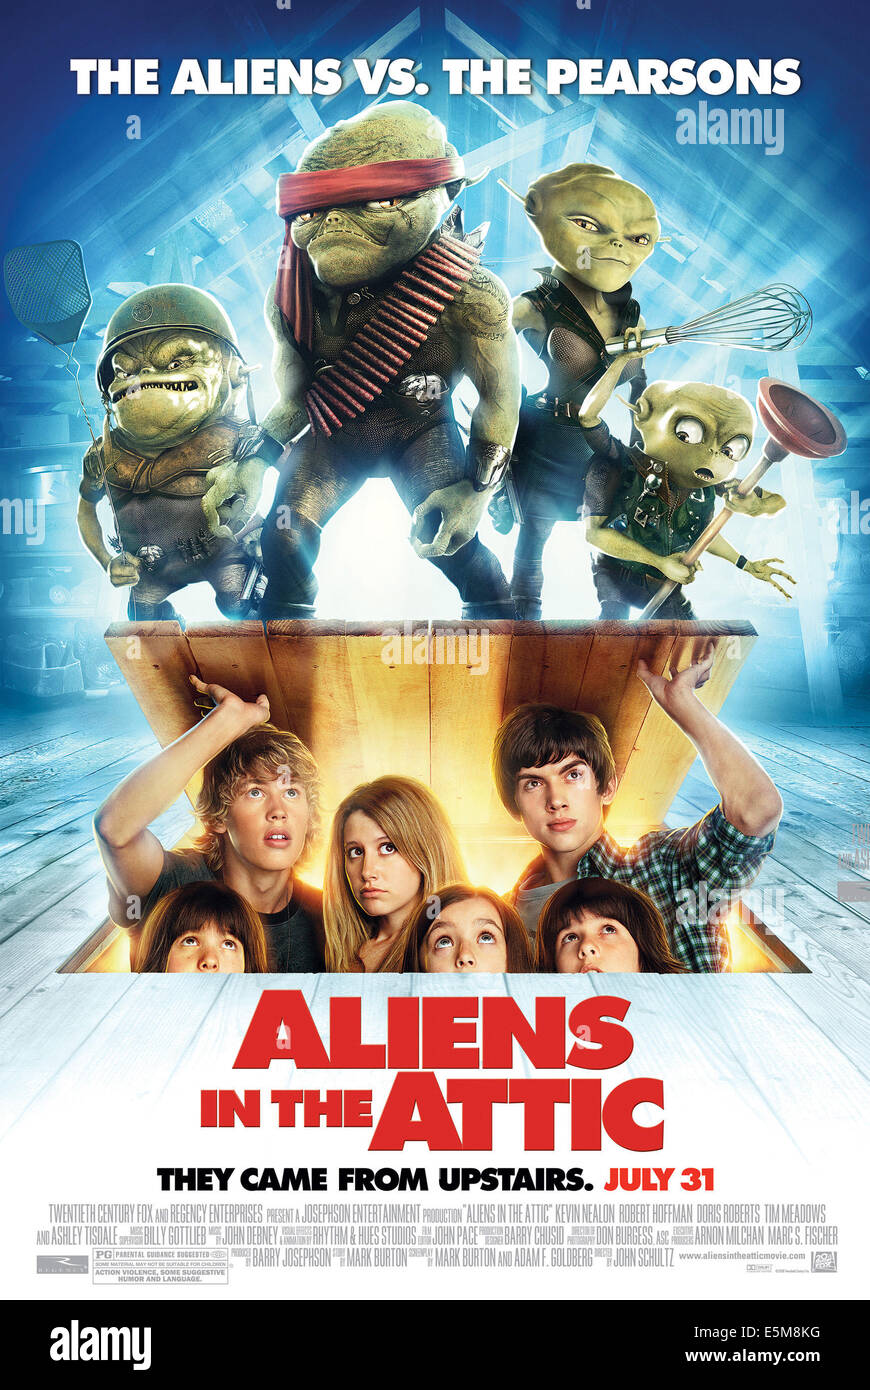 ALIENS IN THE ATTIC, from left: Henri Young, Austin Robert Butler, Ashley Tisdale, Regan Young, Carter Jenkins, Ashley Stock Photo